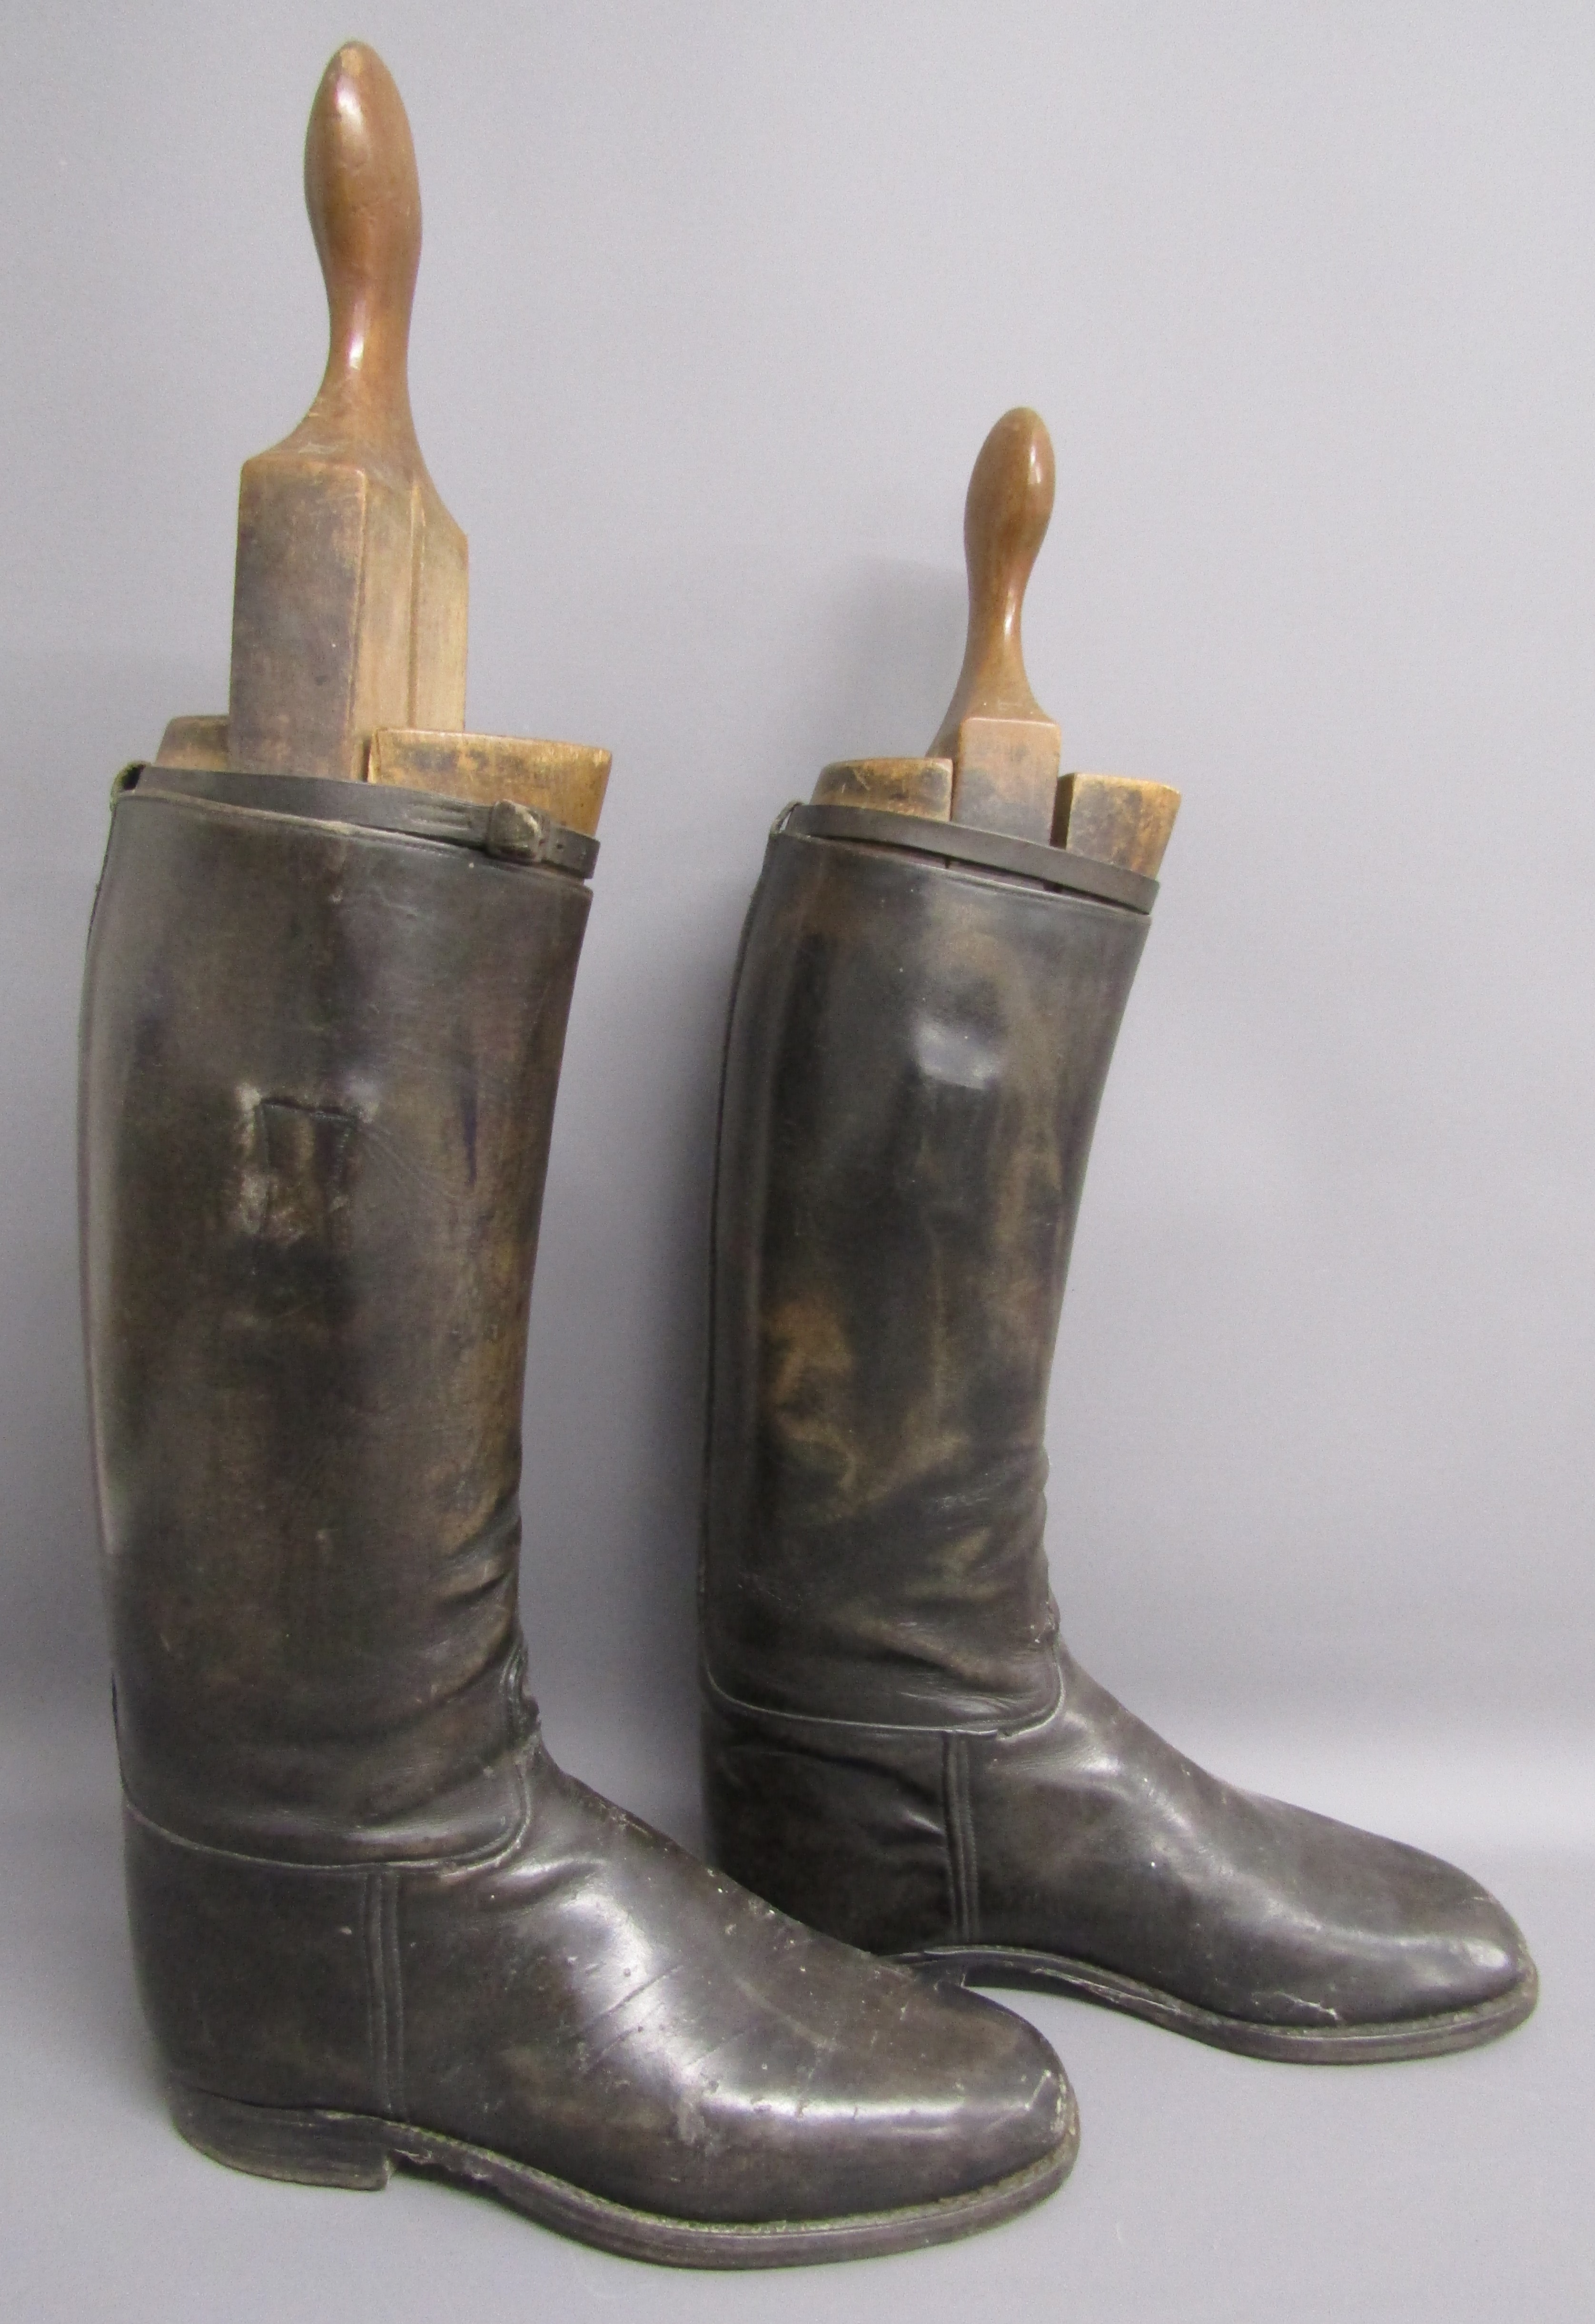 Leather riding boots with wooden boot trees - Image 3 of 7